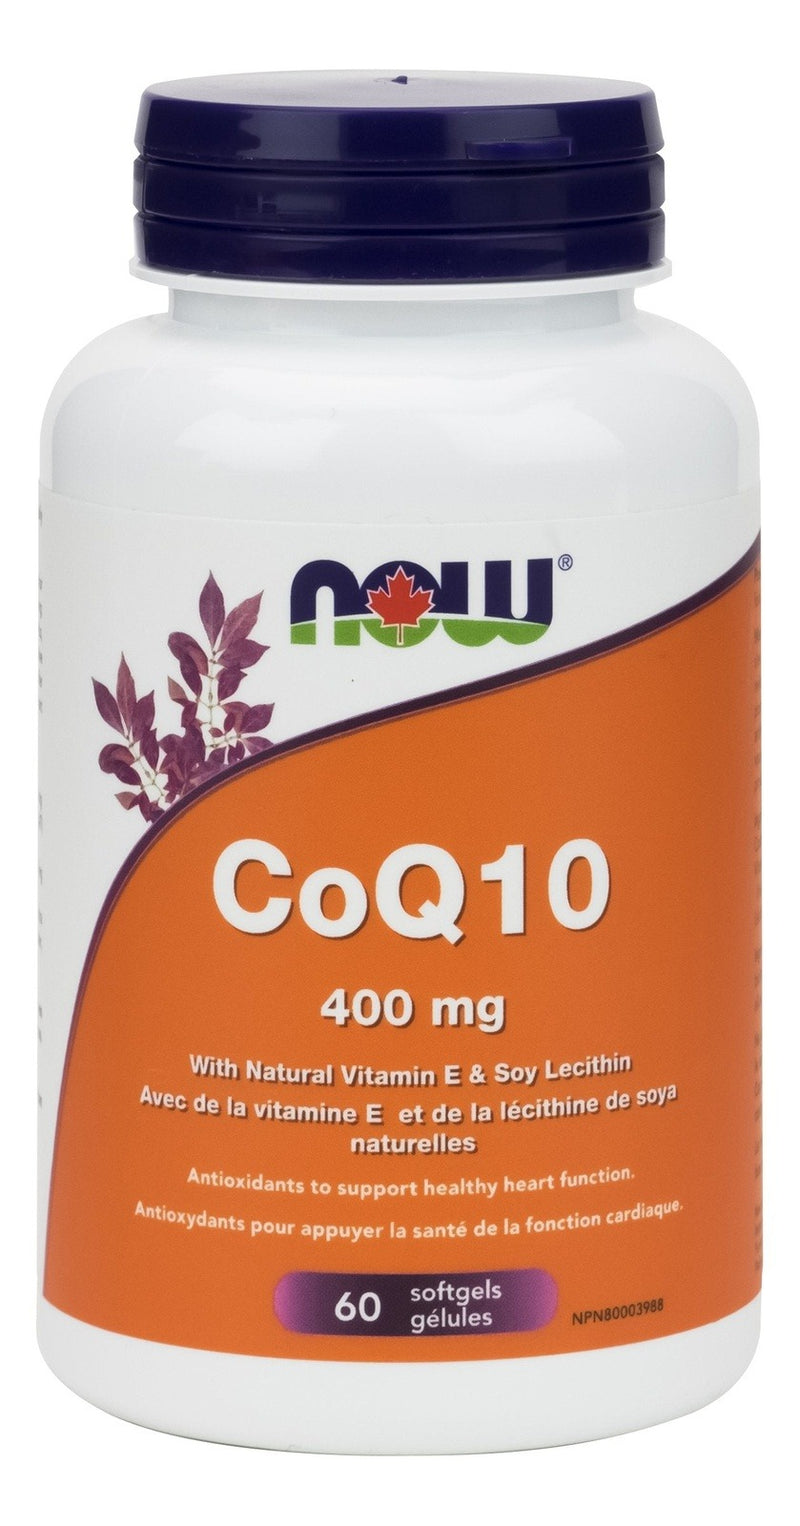 NOW CoQ10 400 mg with Vitamin E and Soy Lecithin 60 Softgels Image 1